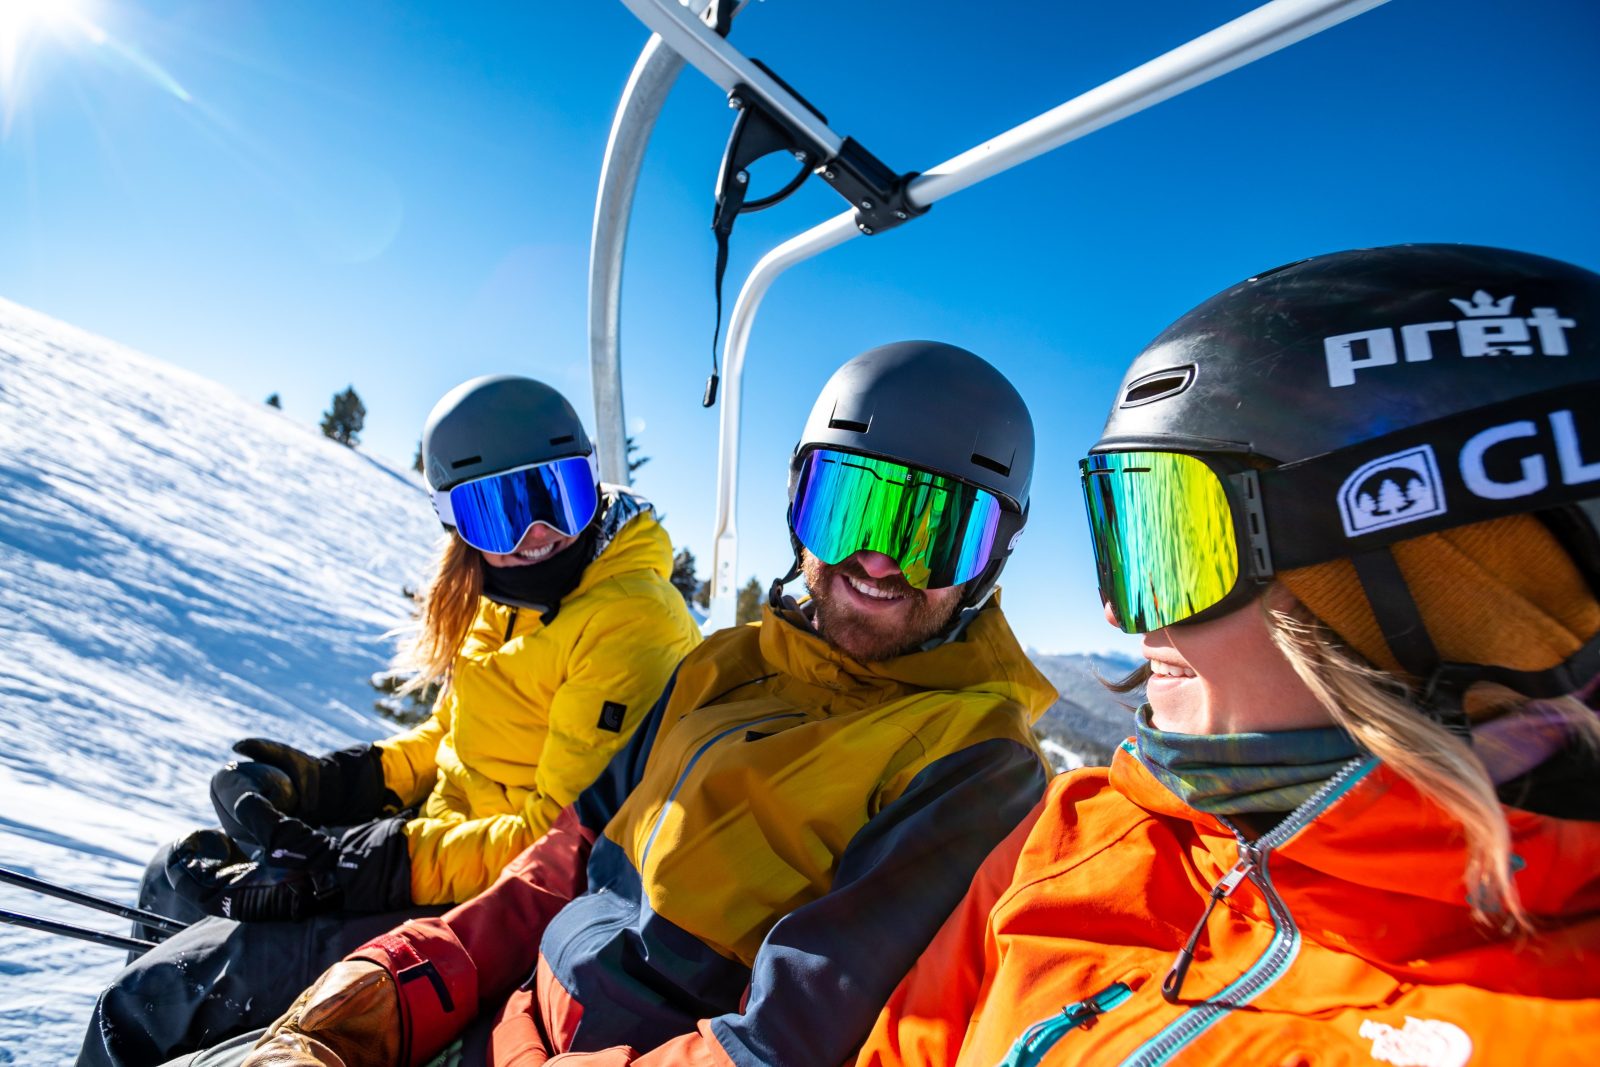 Group ski trip planning: why book an instructor?